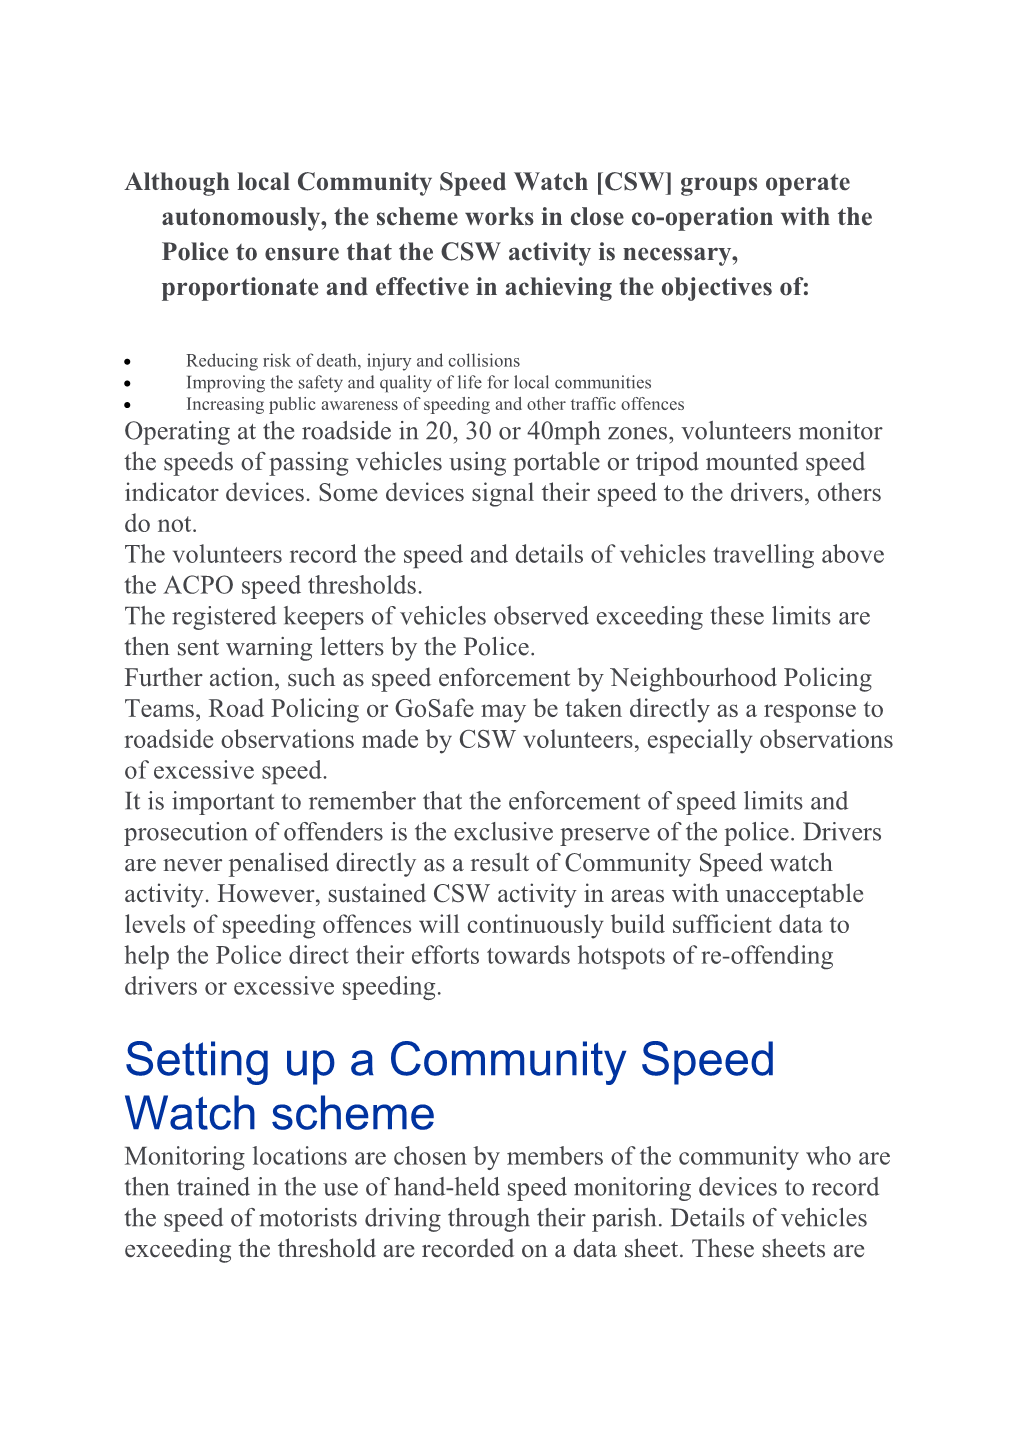 Although Local Community Speed Watch CSW Groups Operate Autonomously, the Scheme Works